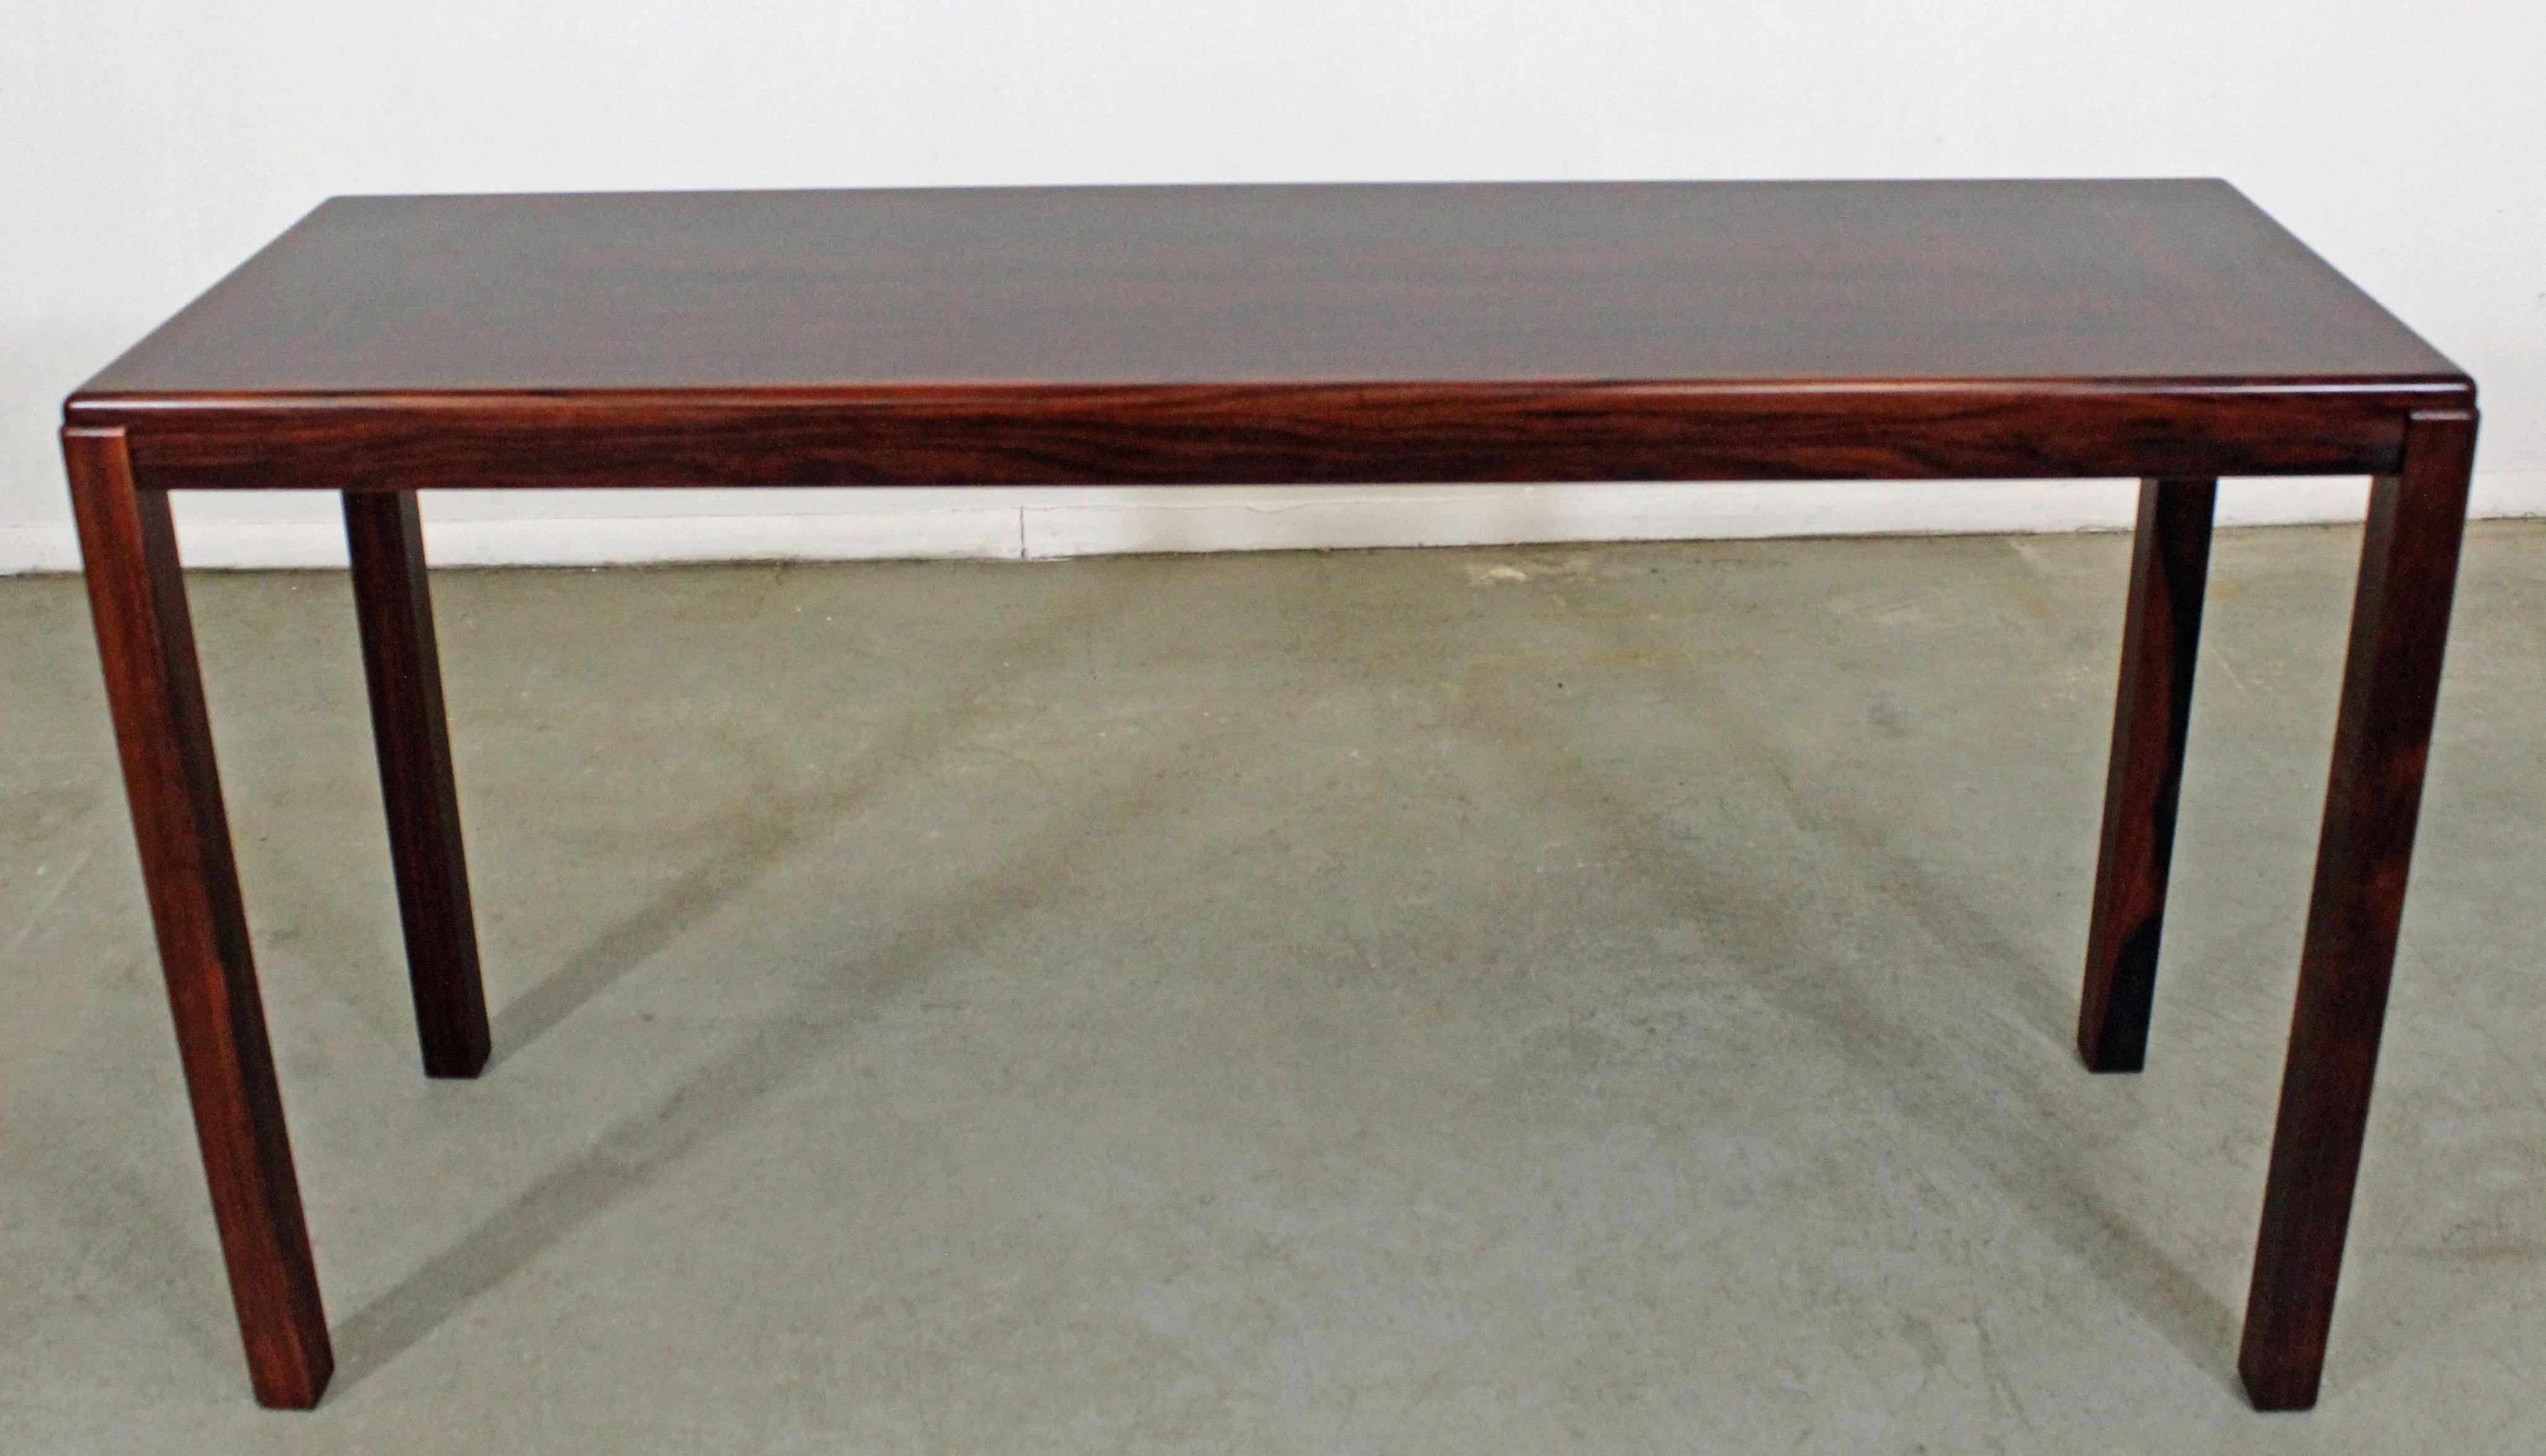 Midcentury Danish modern Vejle Stole Parquet top rosewood console table.

Offered is a beautiful Danish modern rosewood console table with a parquet top made by Vejle Stole & Mobelfabrik. It is in very good condition for its age, showing slight